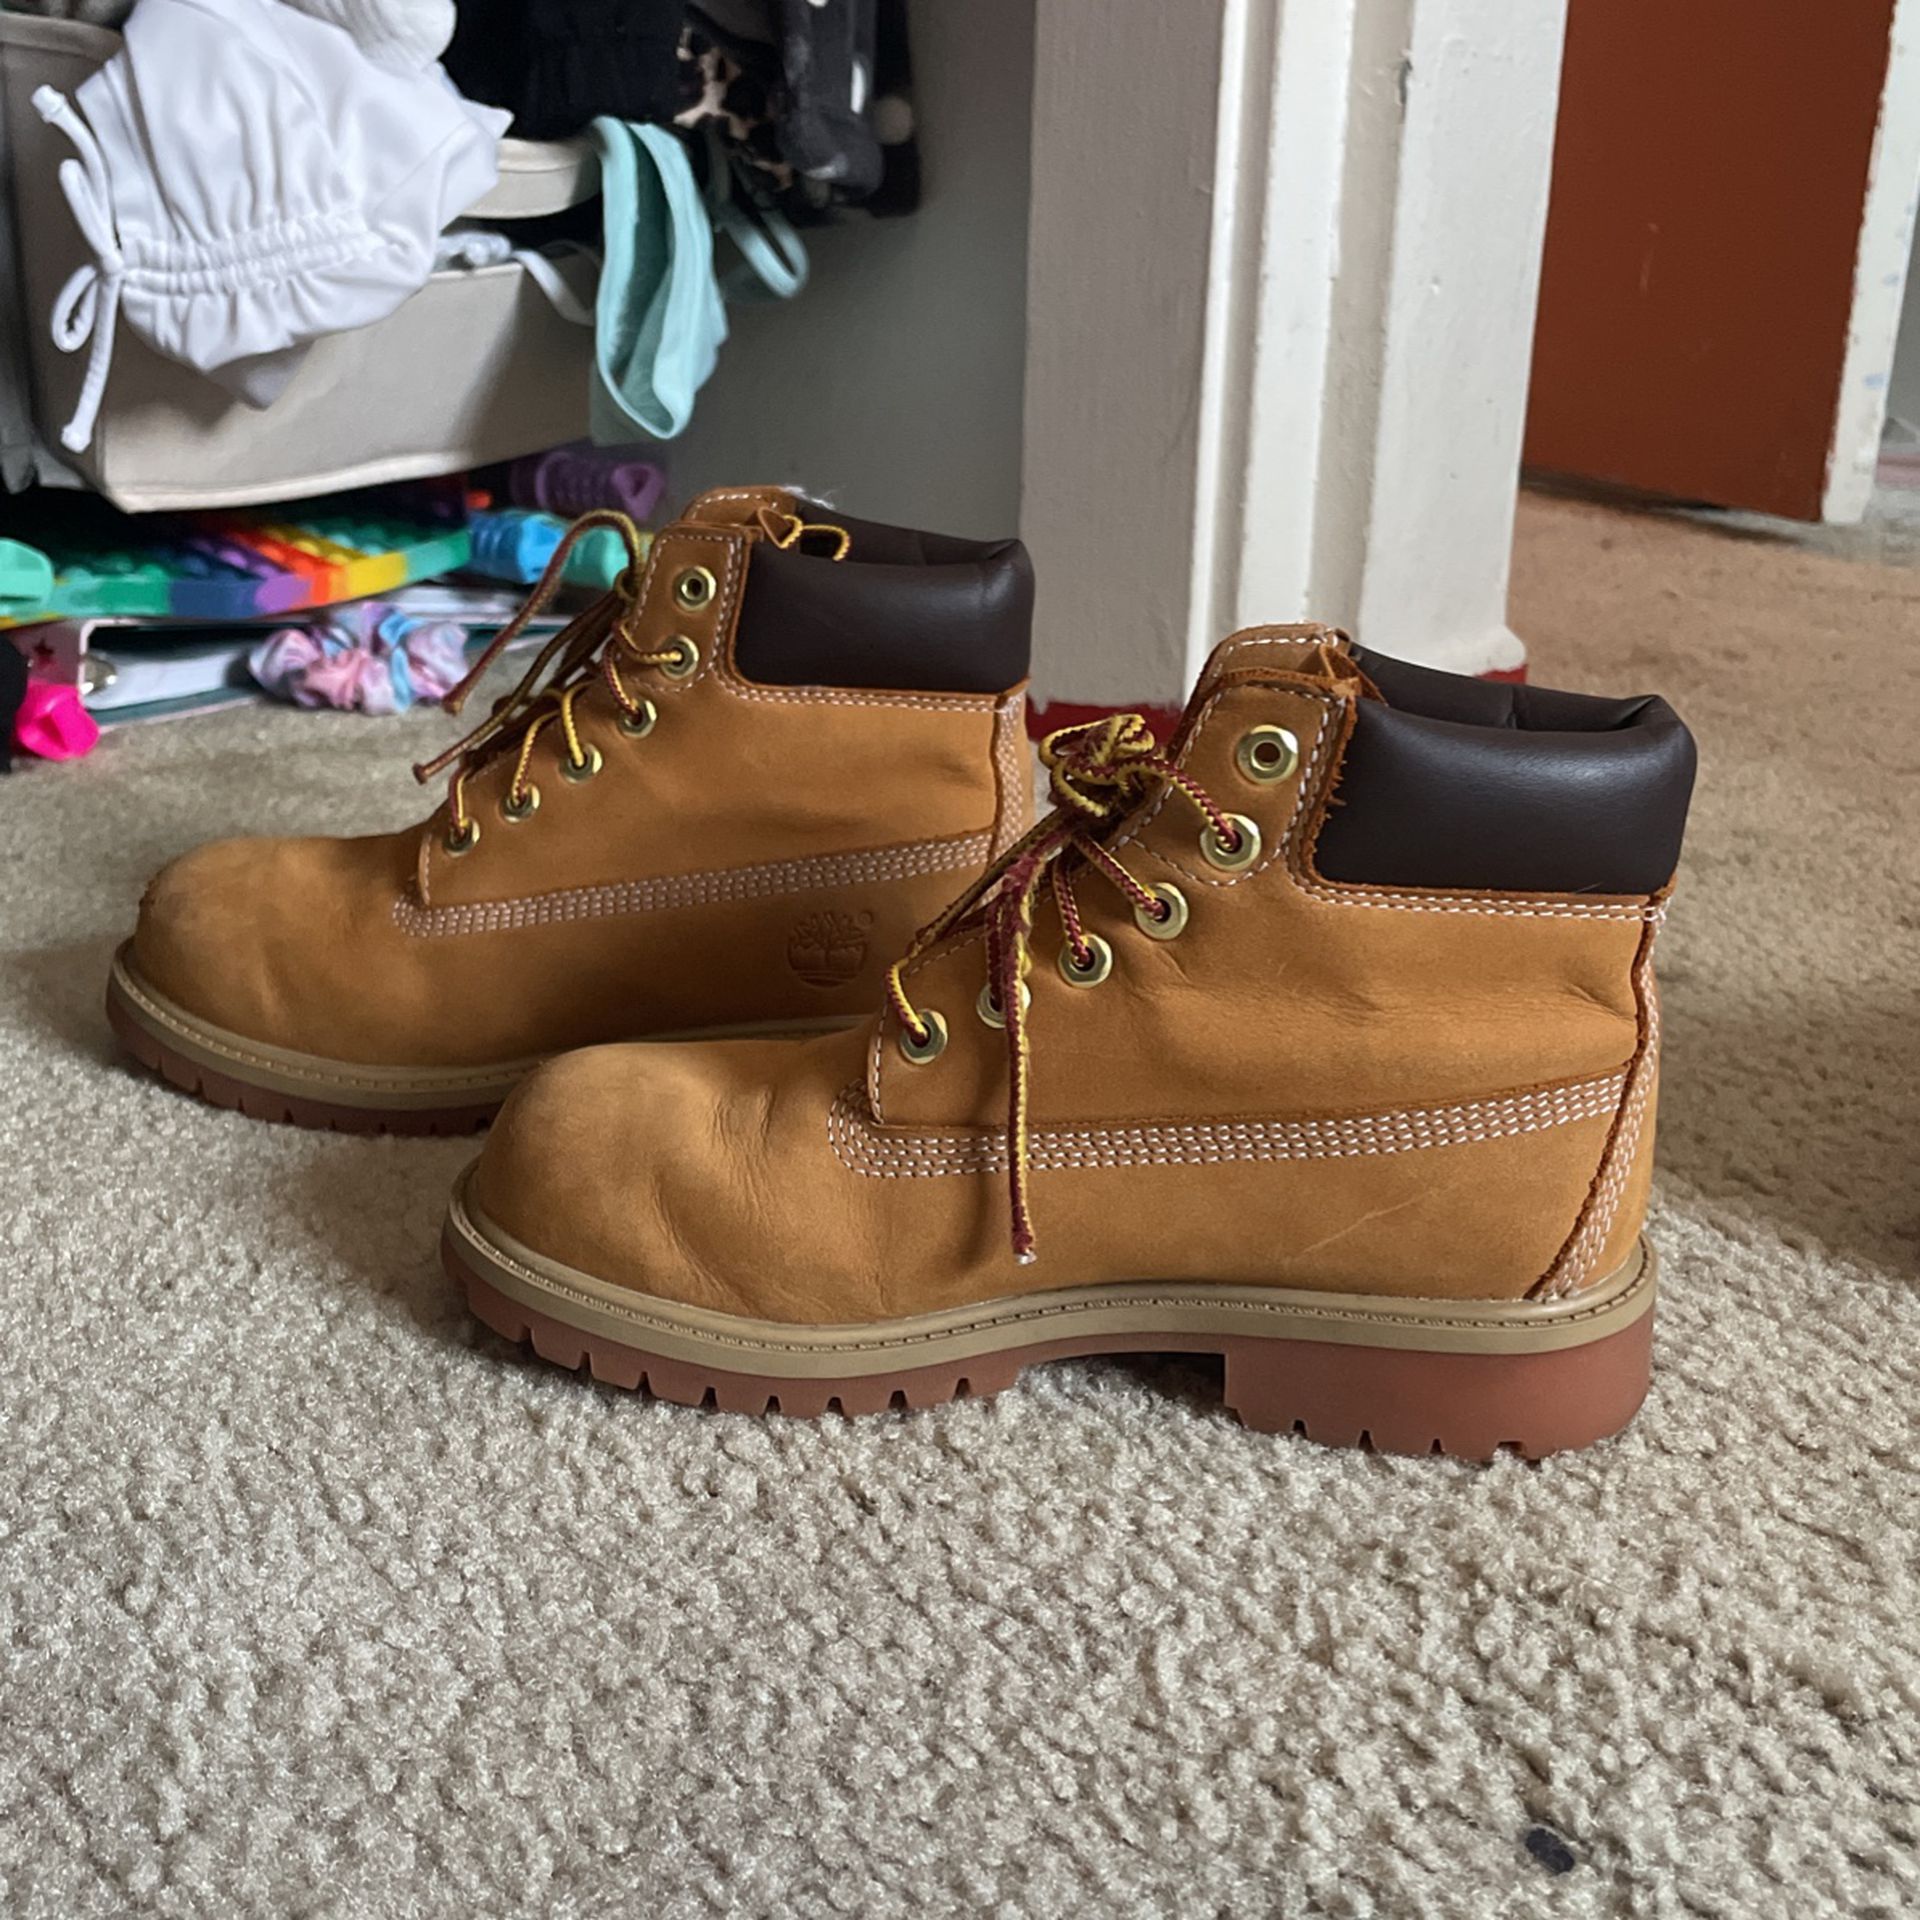 Smash bod Macadam Timberland Shoes used for Sale in Riverside, CA - OfferUp